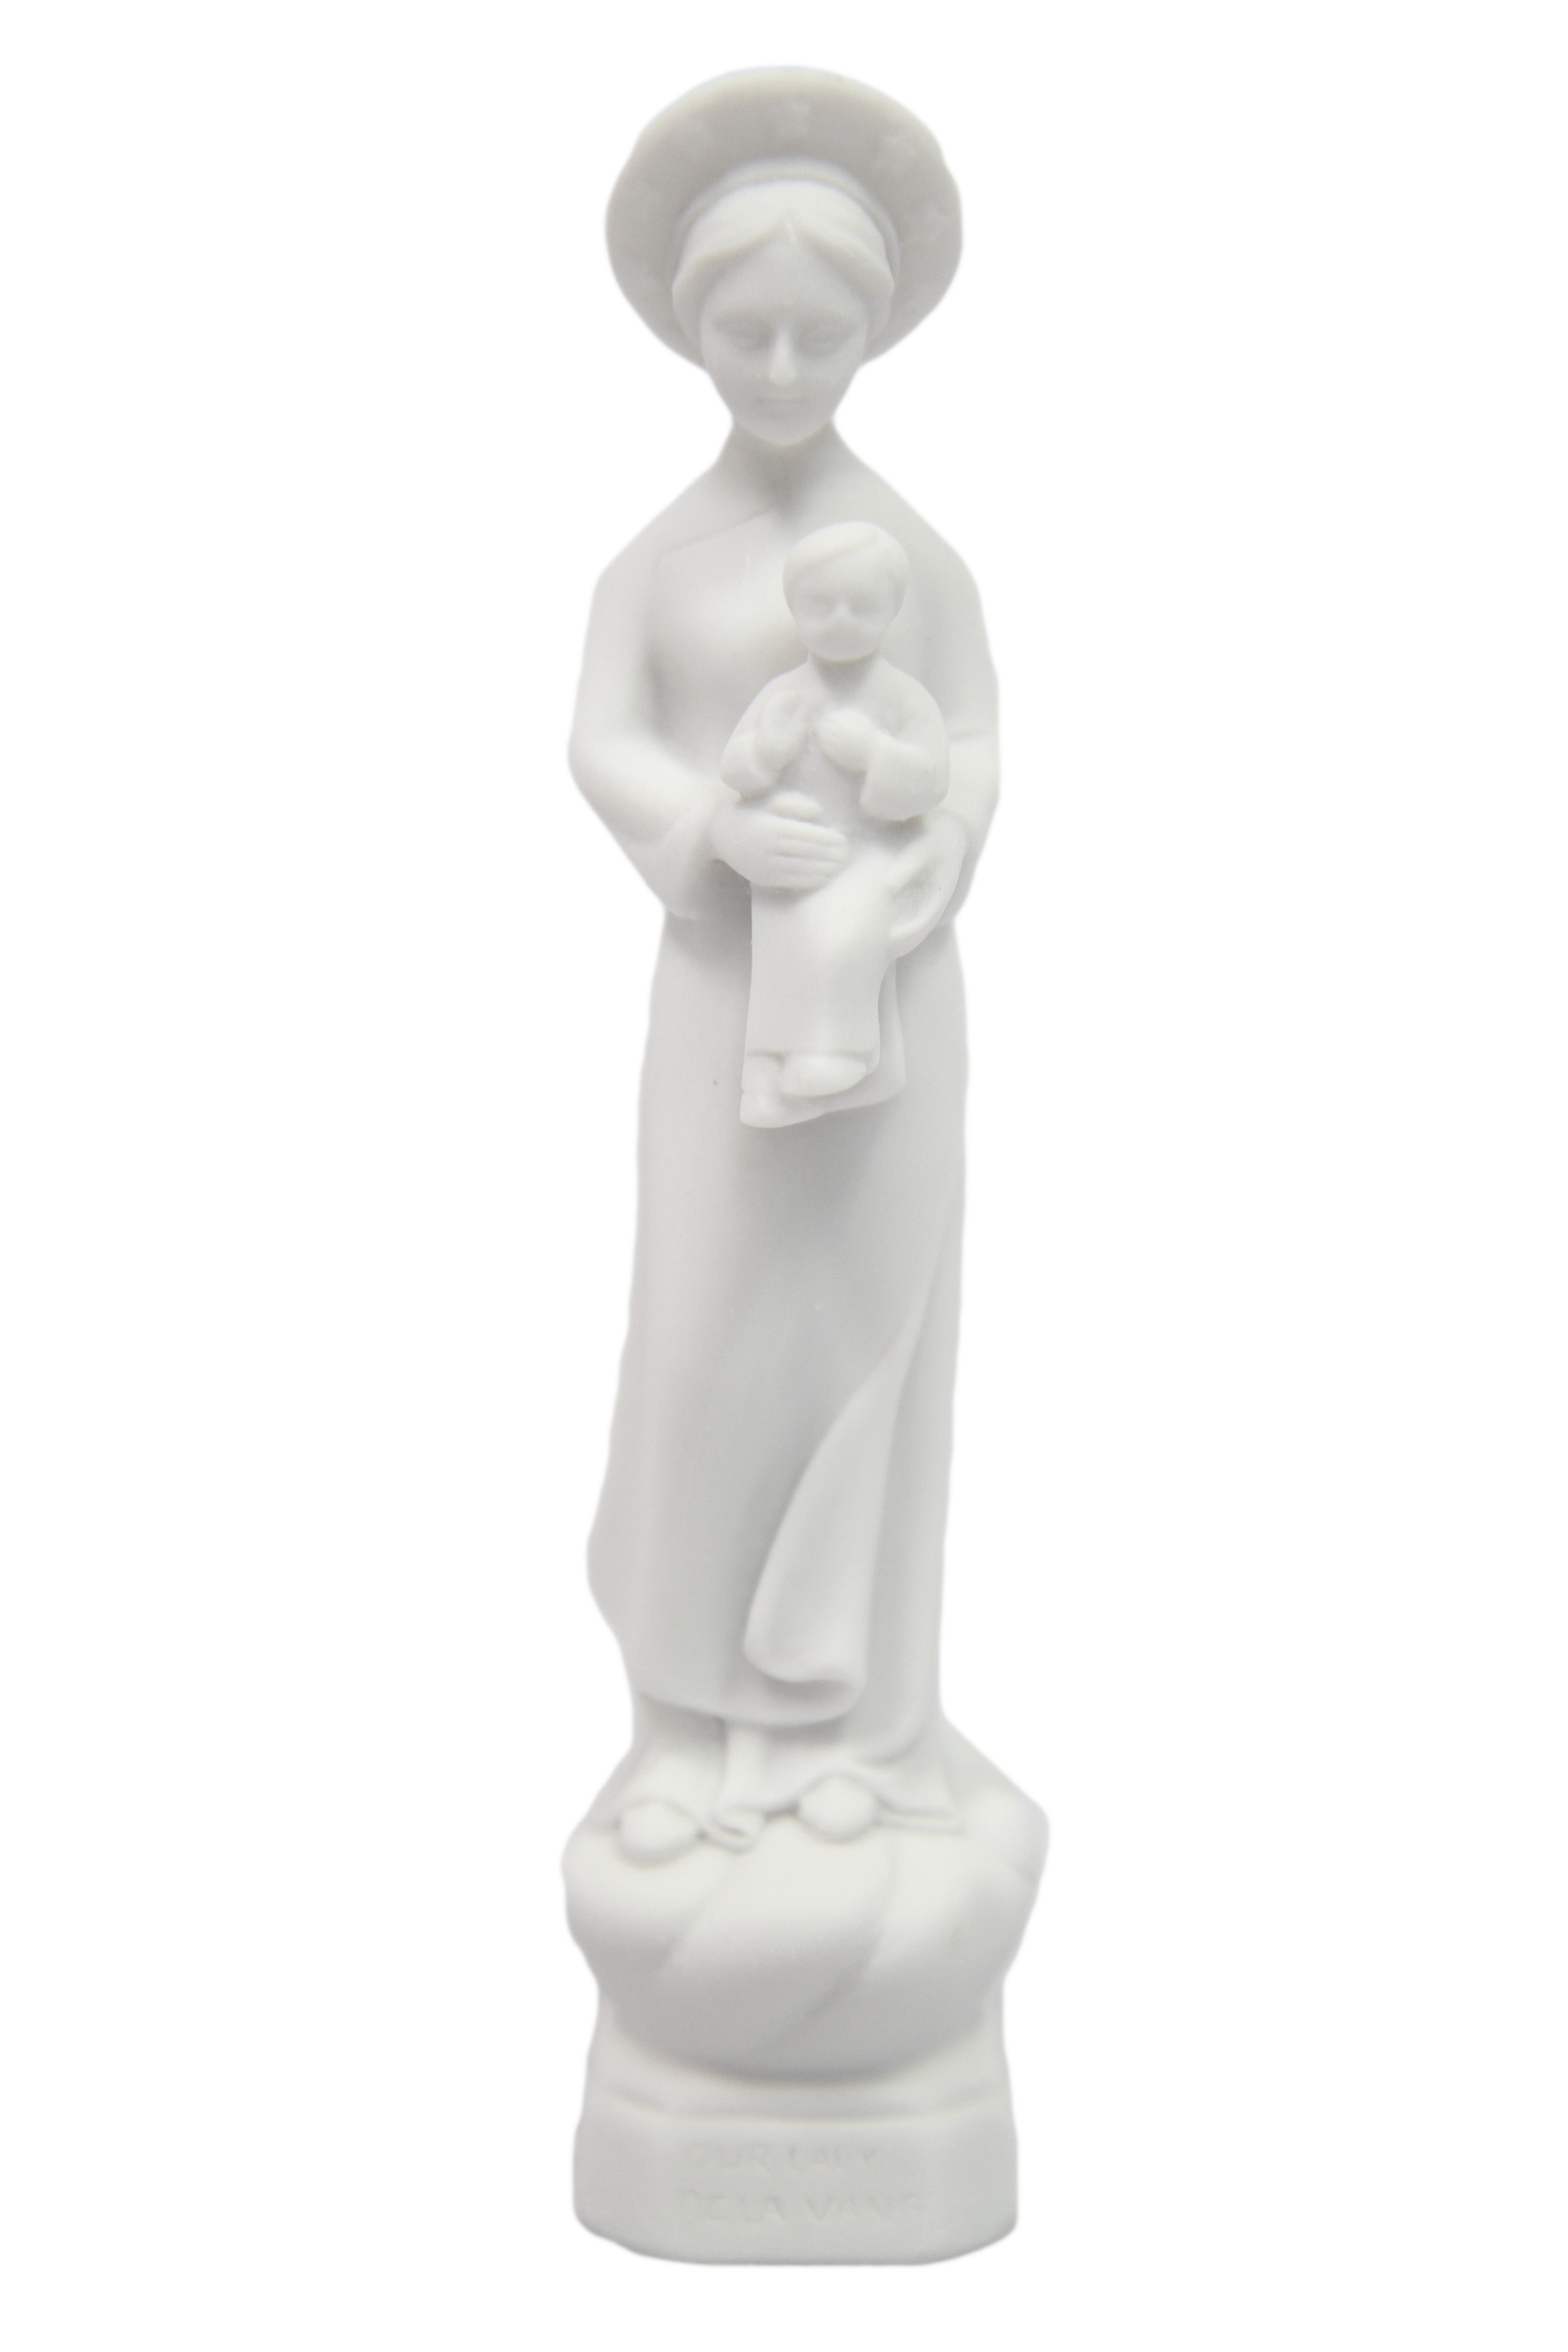 5" Our Lady of La Vang Virgin Mary Blessed Mother Catholic Religious Statue Figurine Vittoria Collection